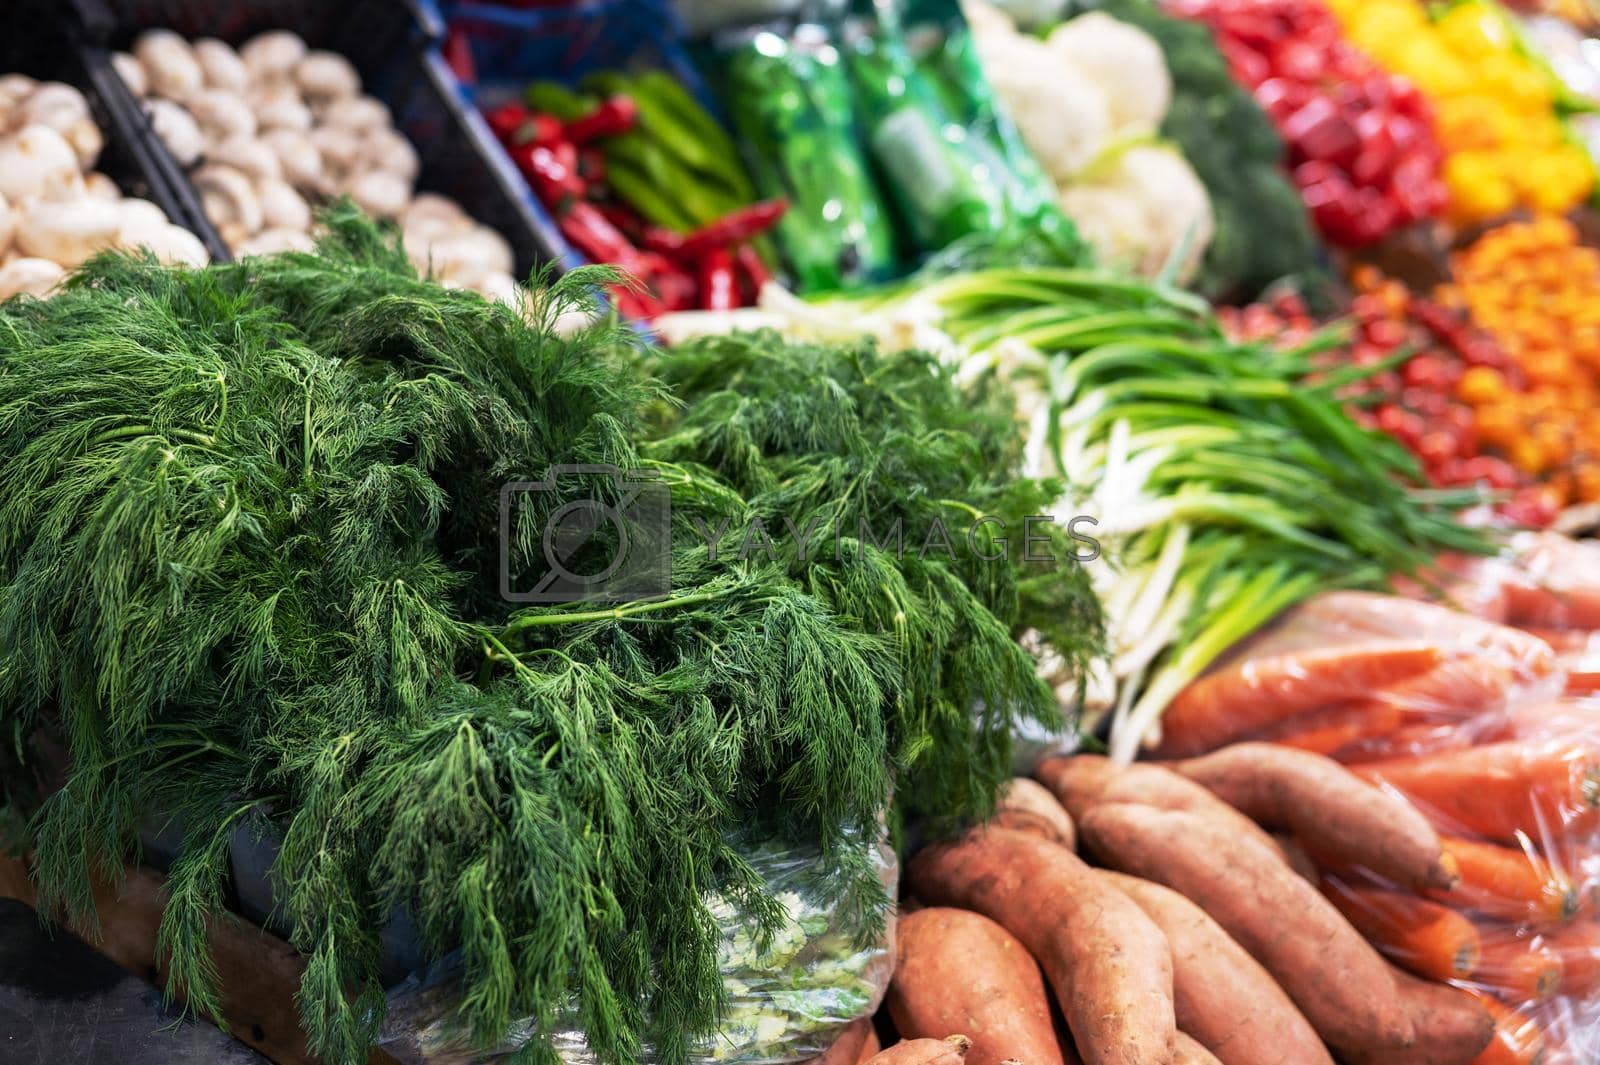 Royalty free image of Assortment of fresh vegetables by rusak